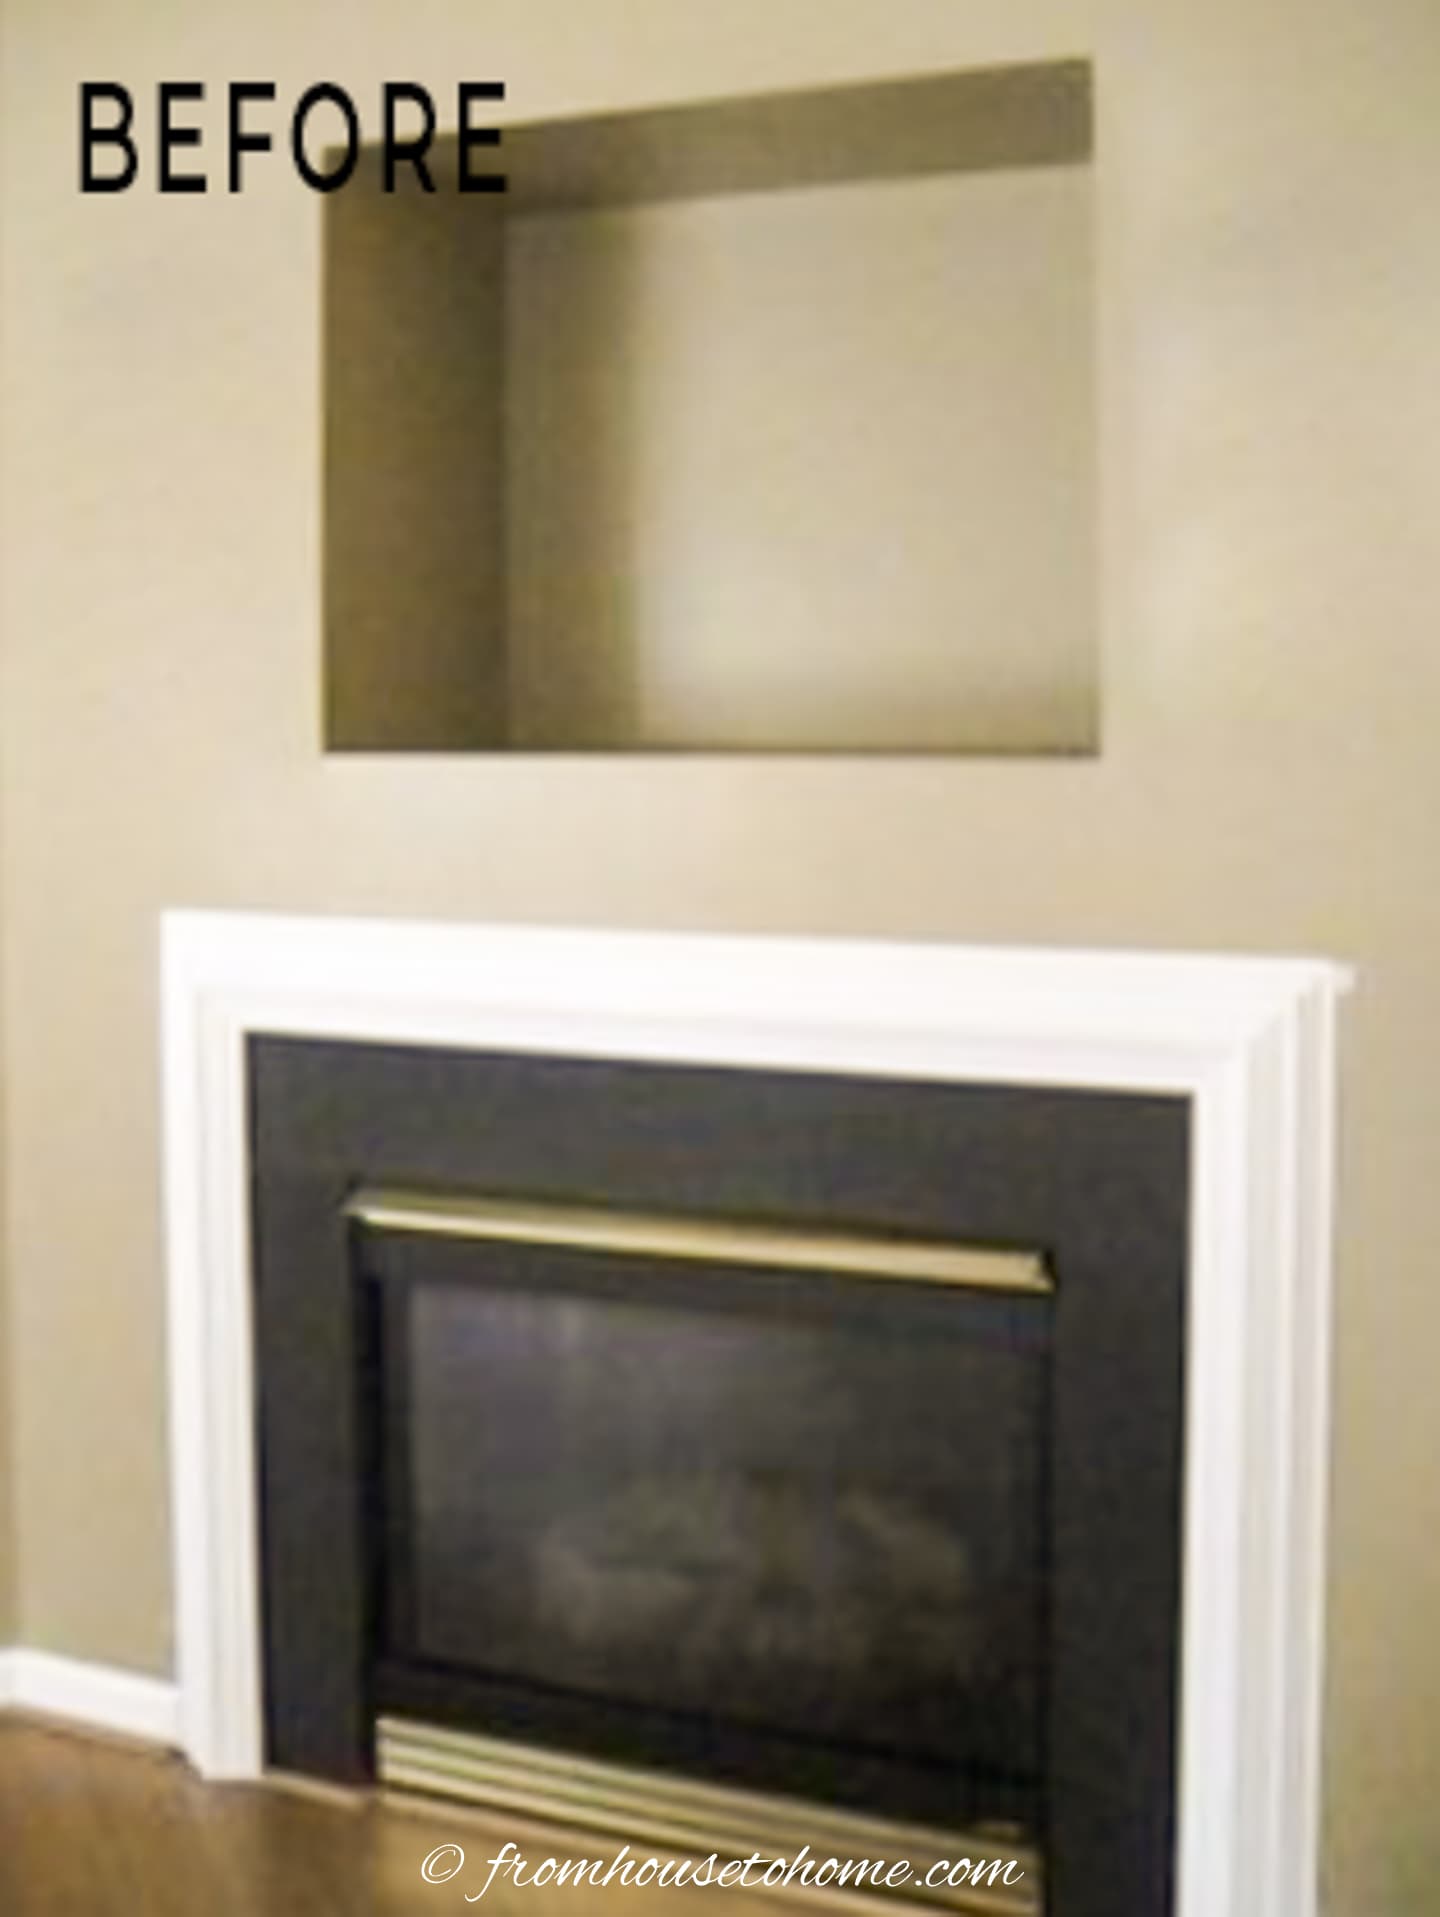 A before and after picture of a fireplace.